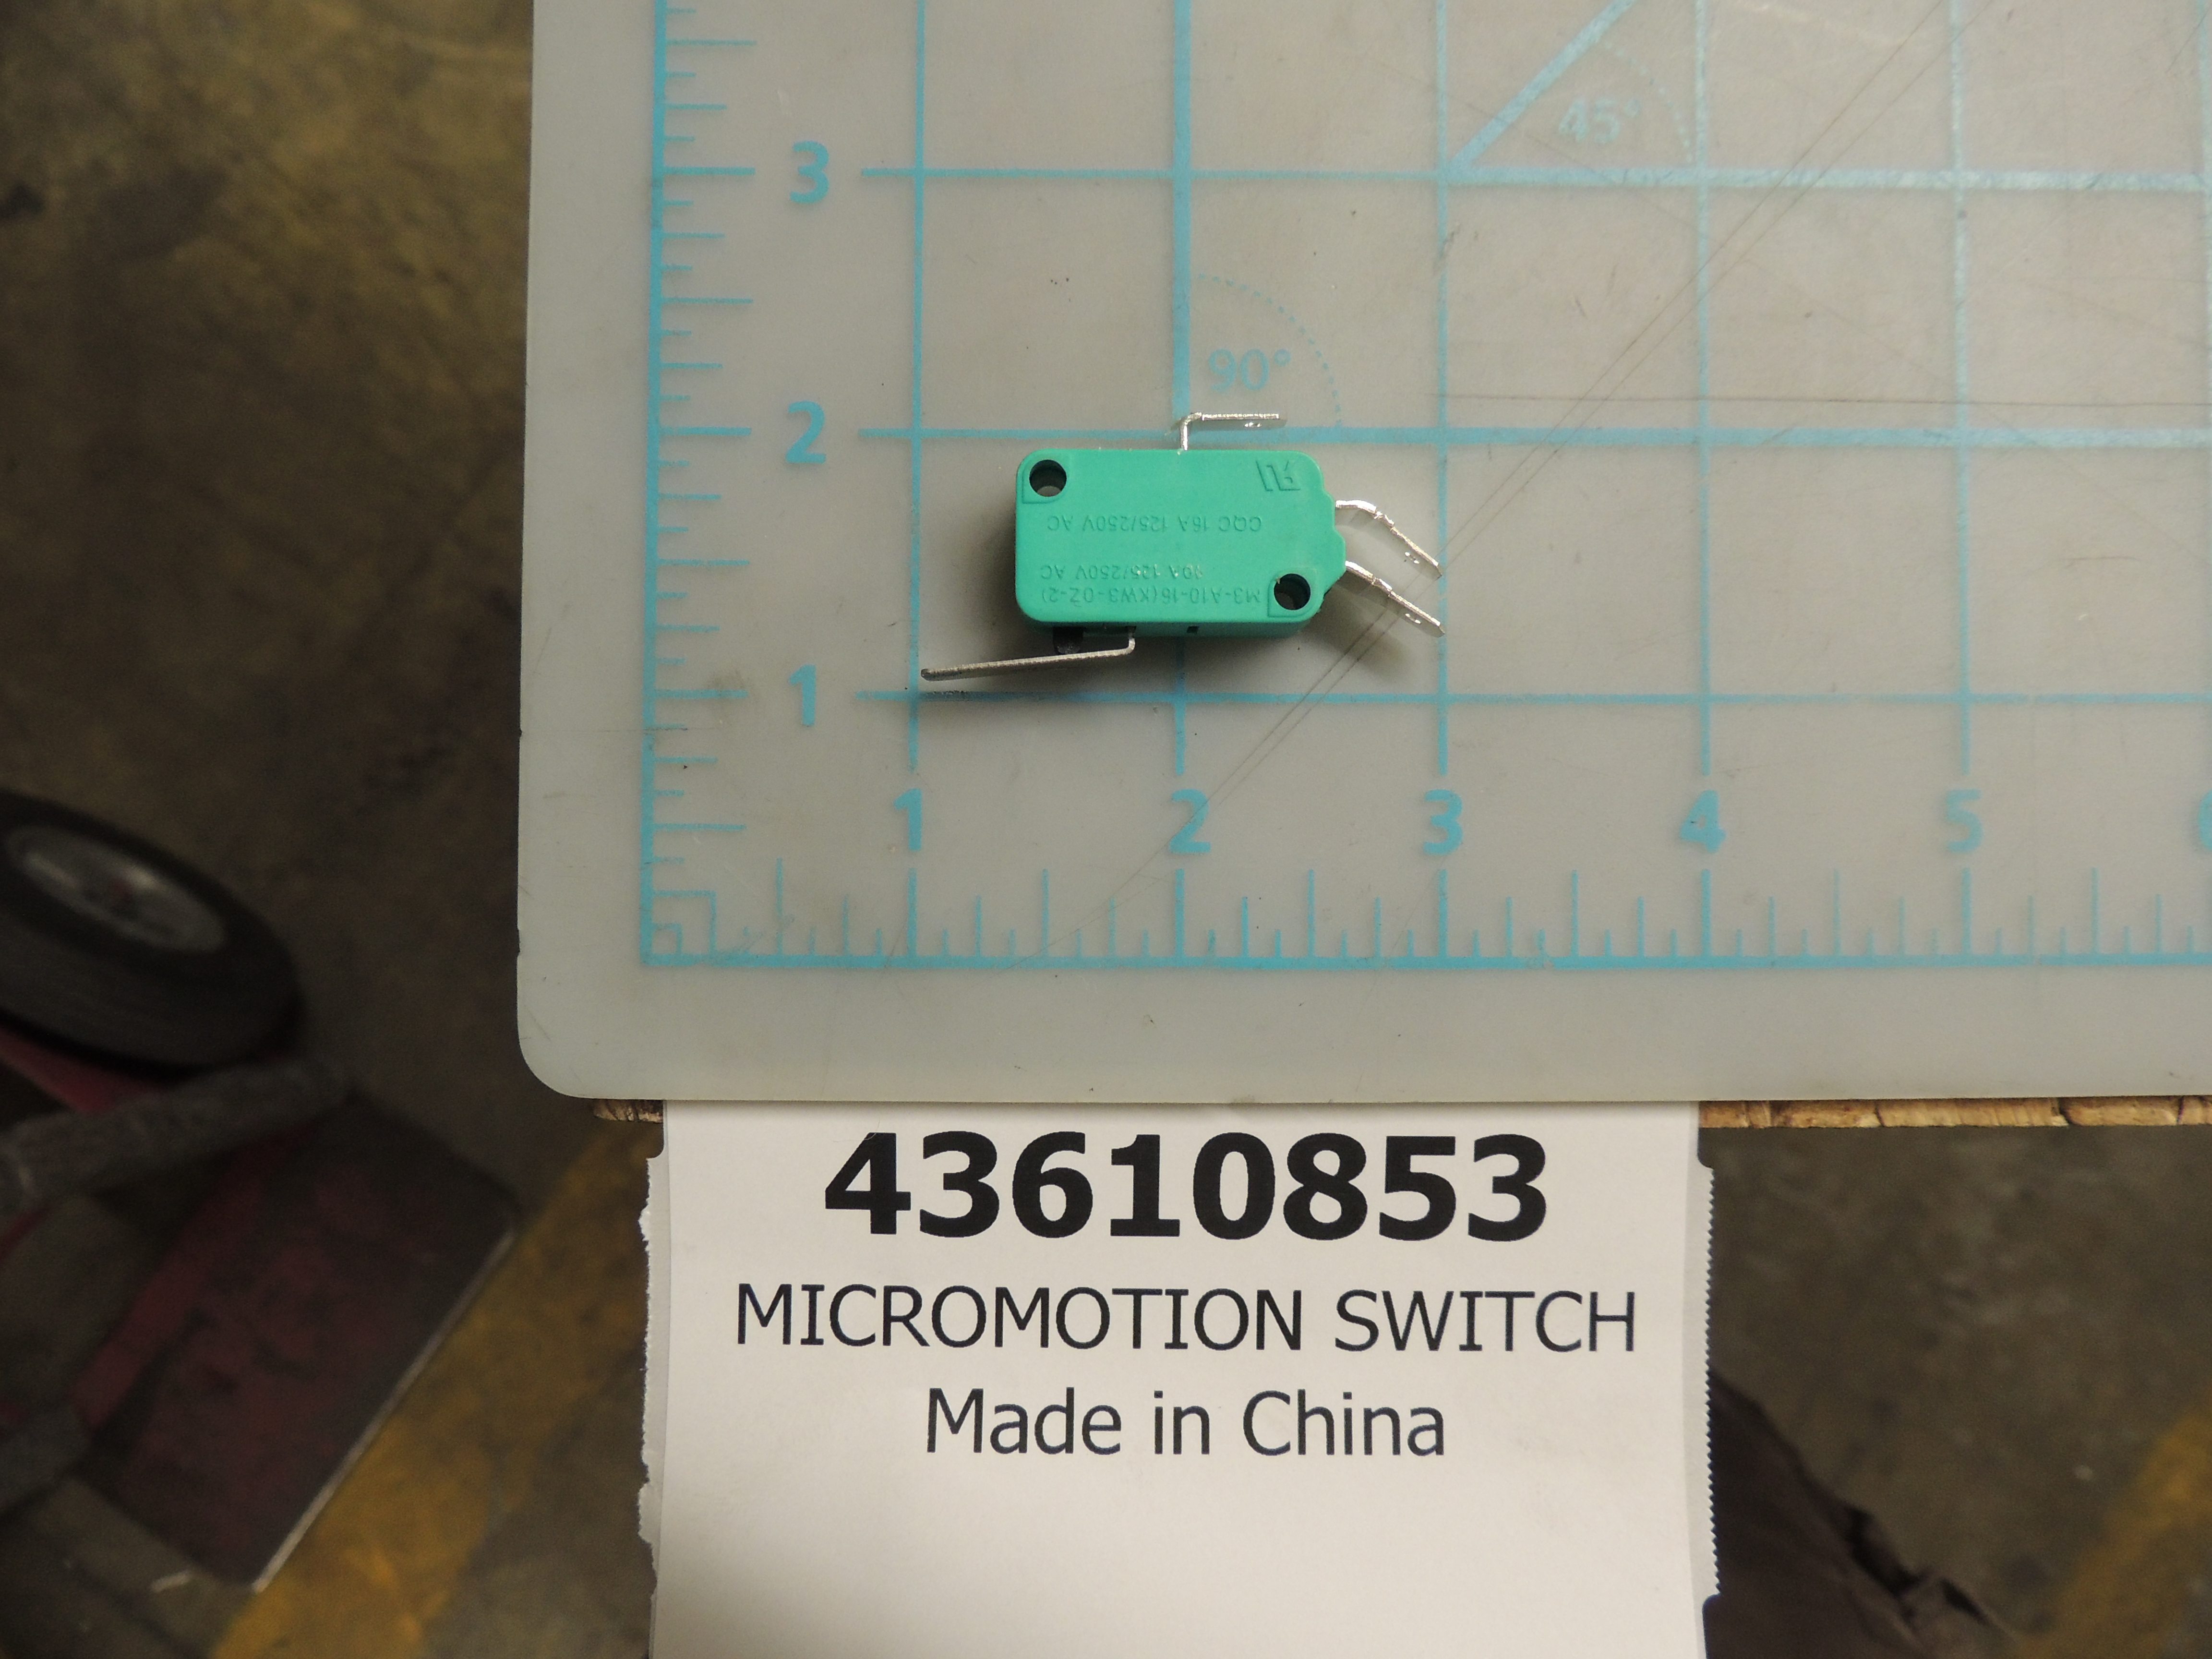 MICROMOTION SWITCH